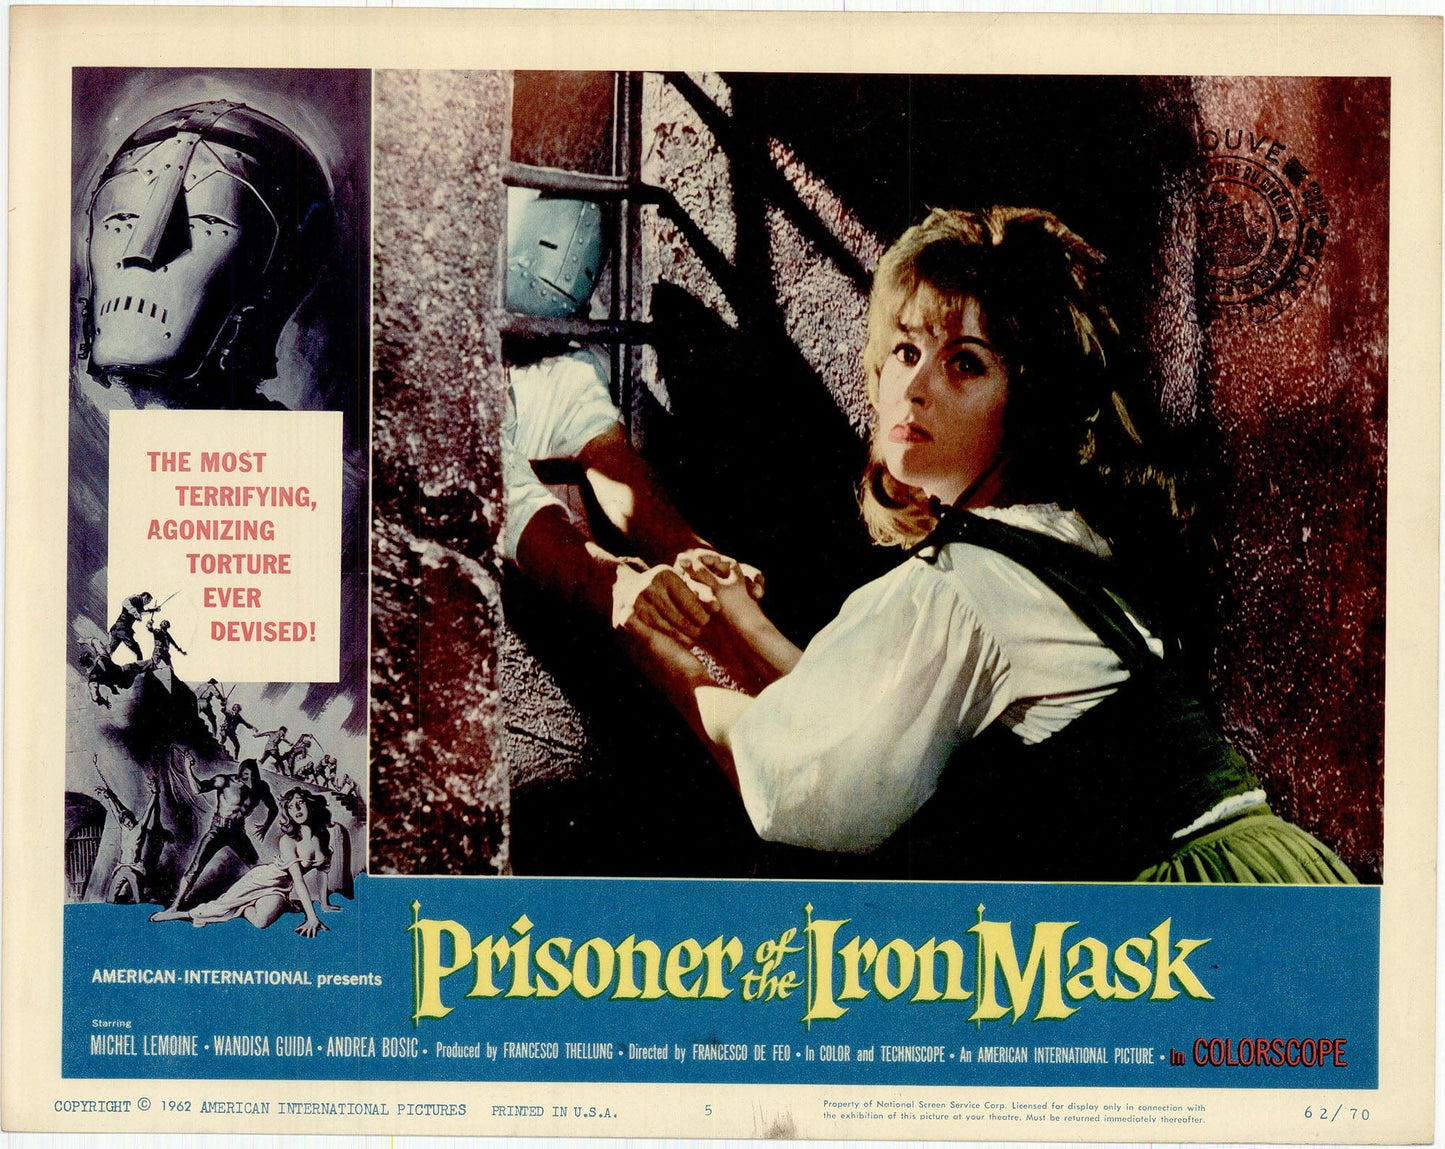 The Prisoner of the Iron Mask Movie Lobby Card